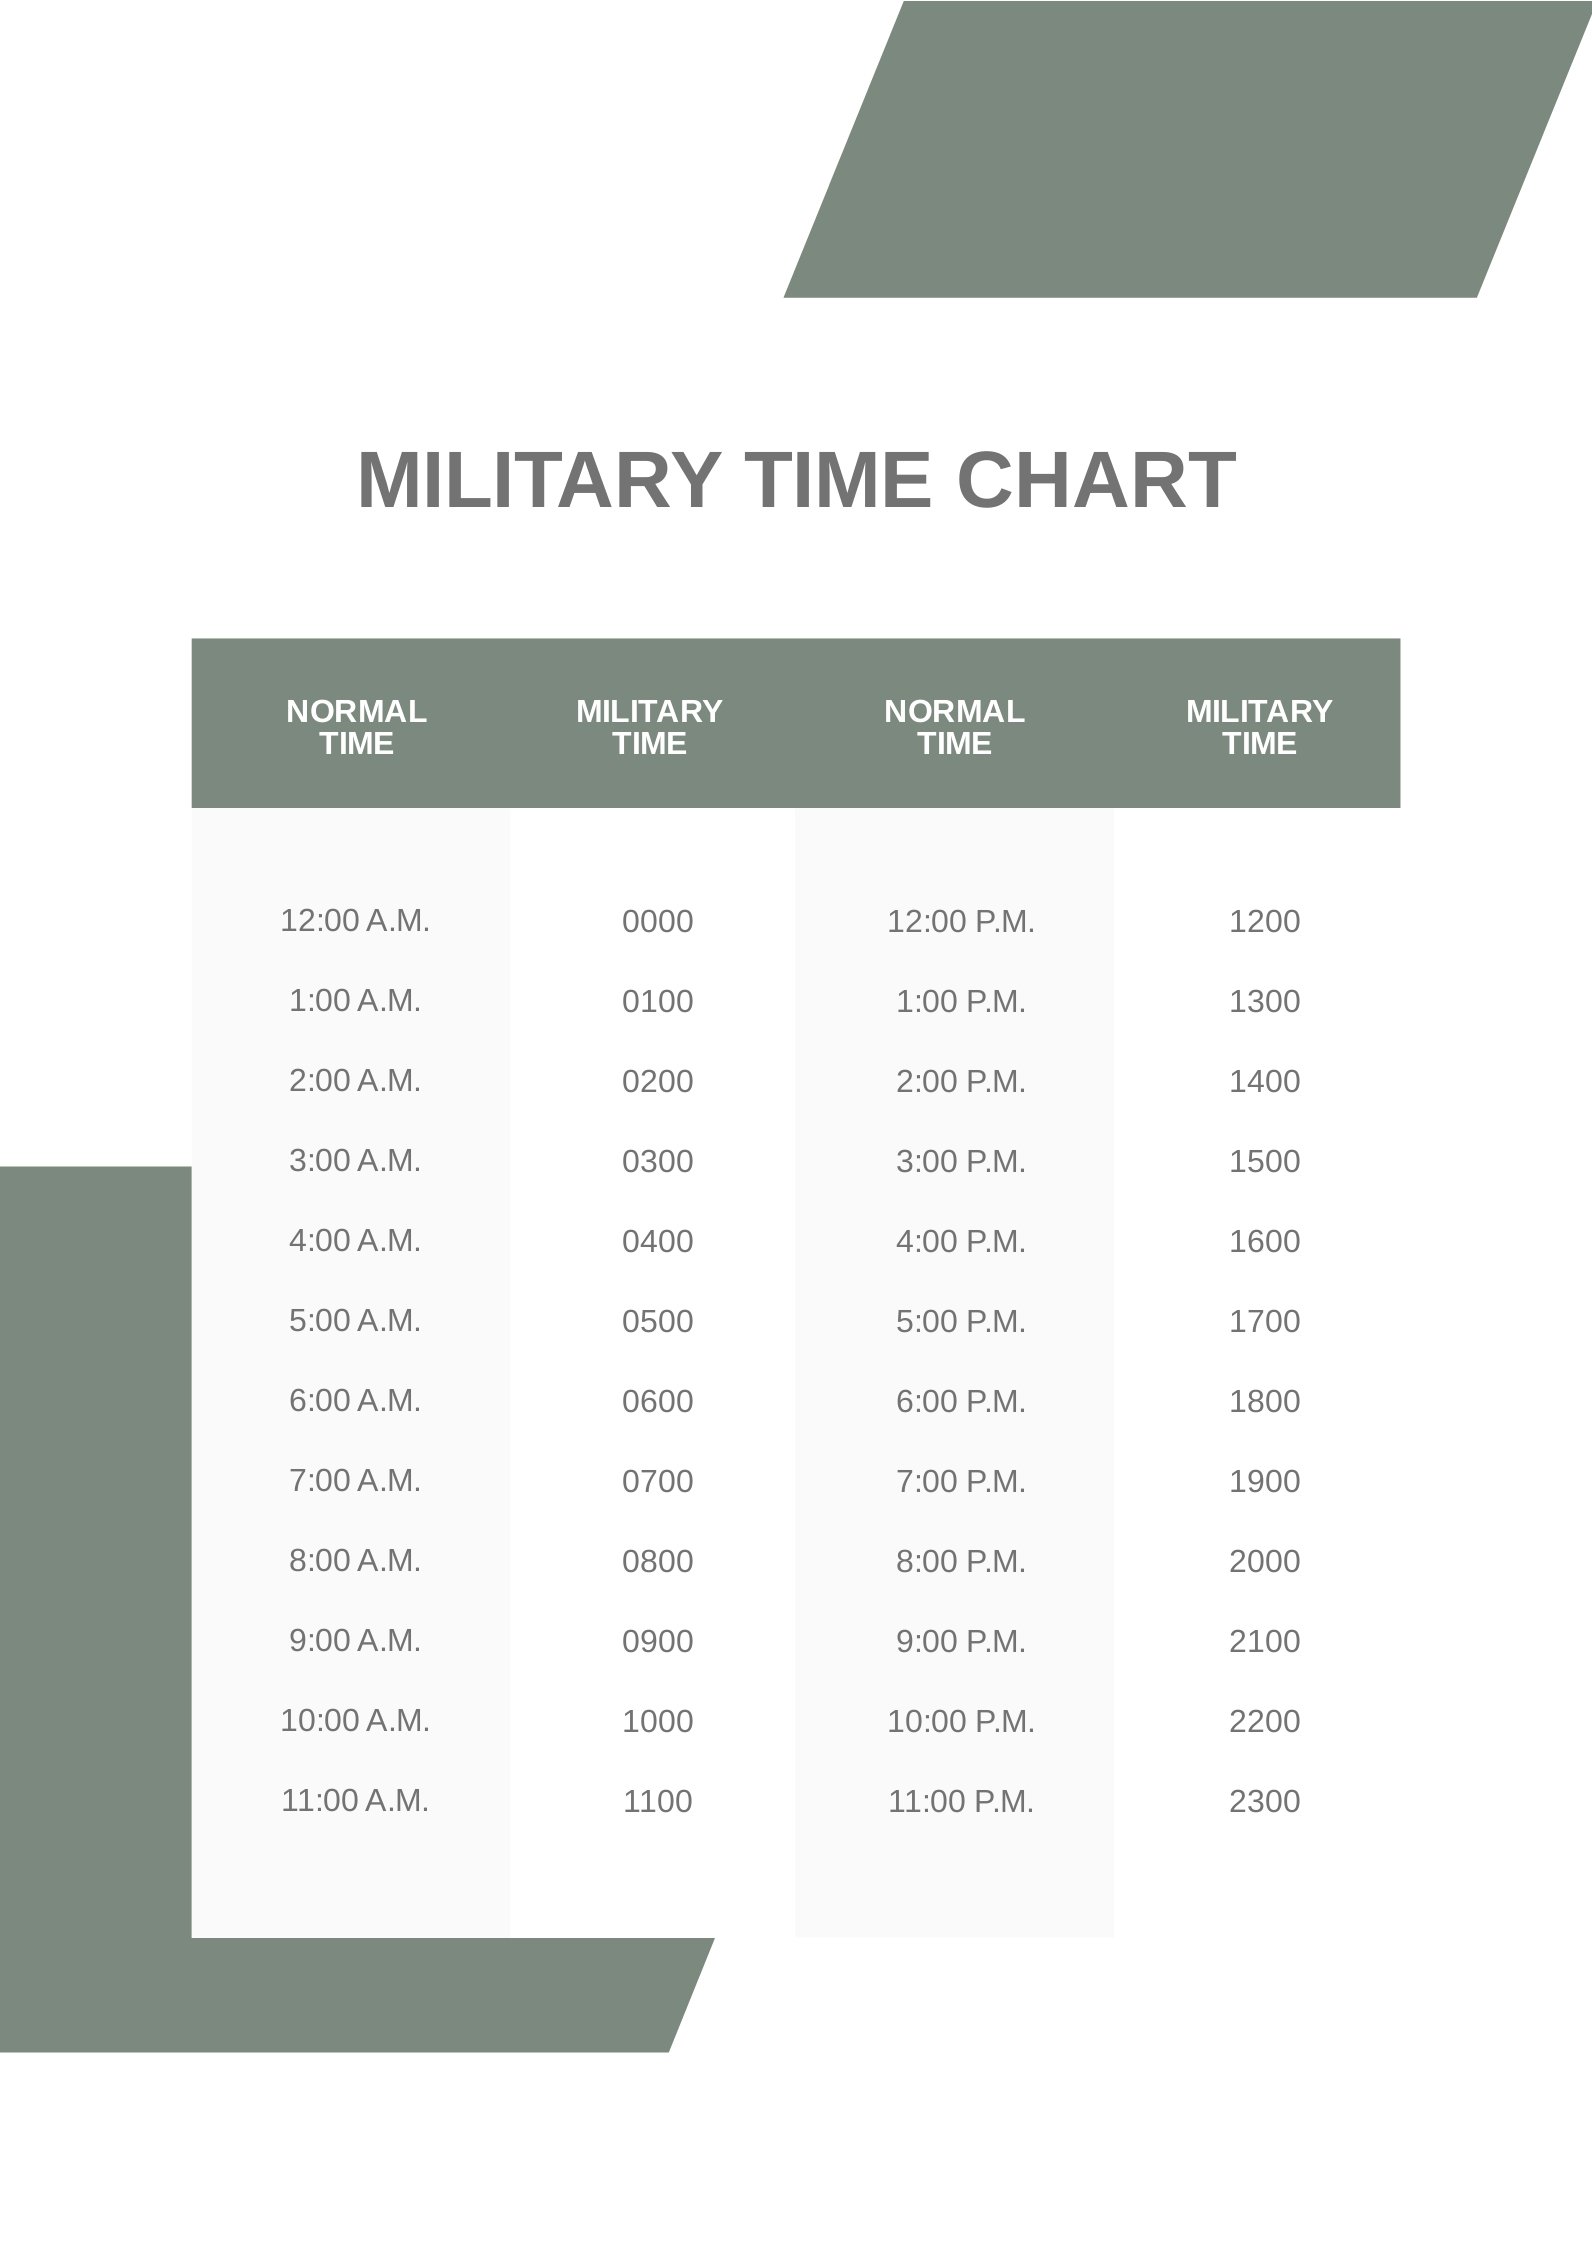 military-time-chart-infographic-poster-size-template-lupon-gov-ph